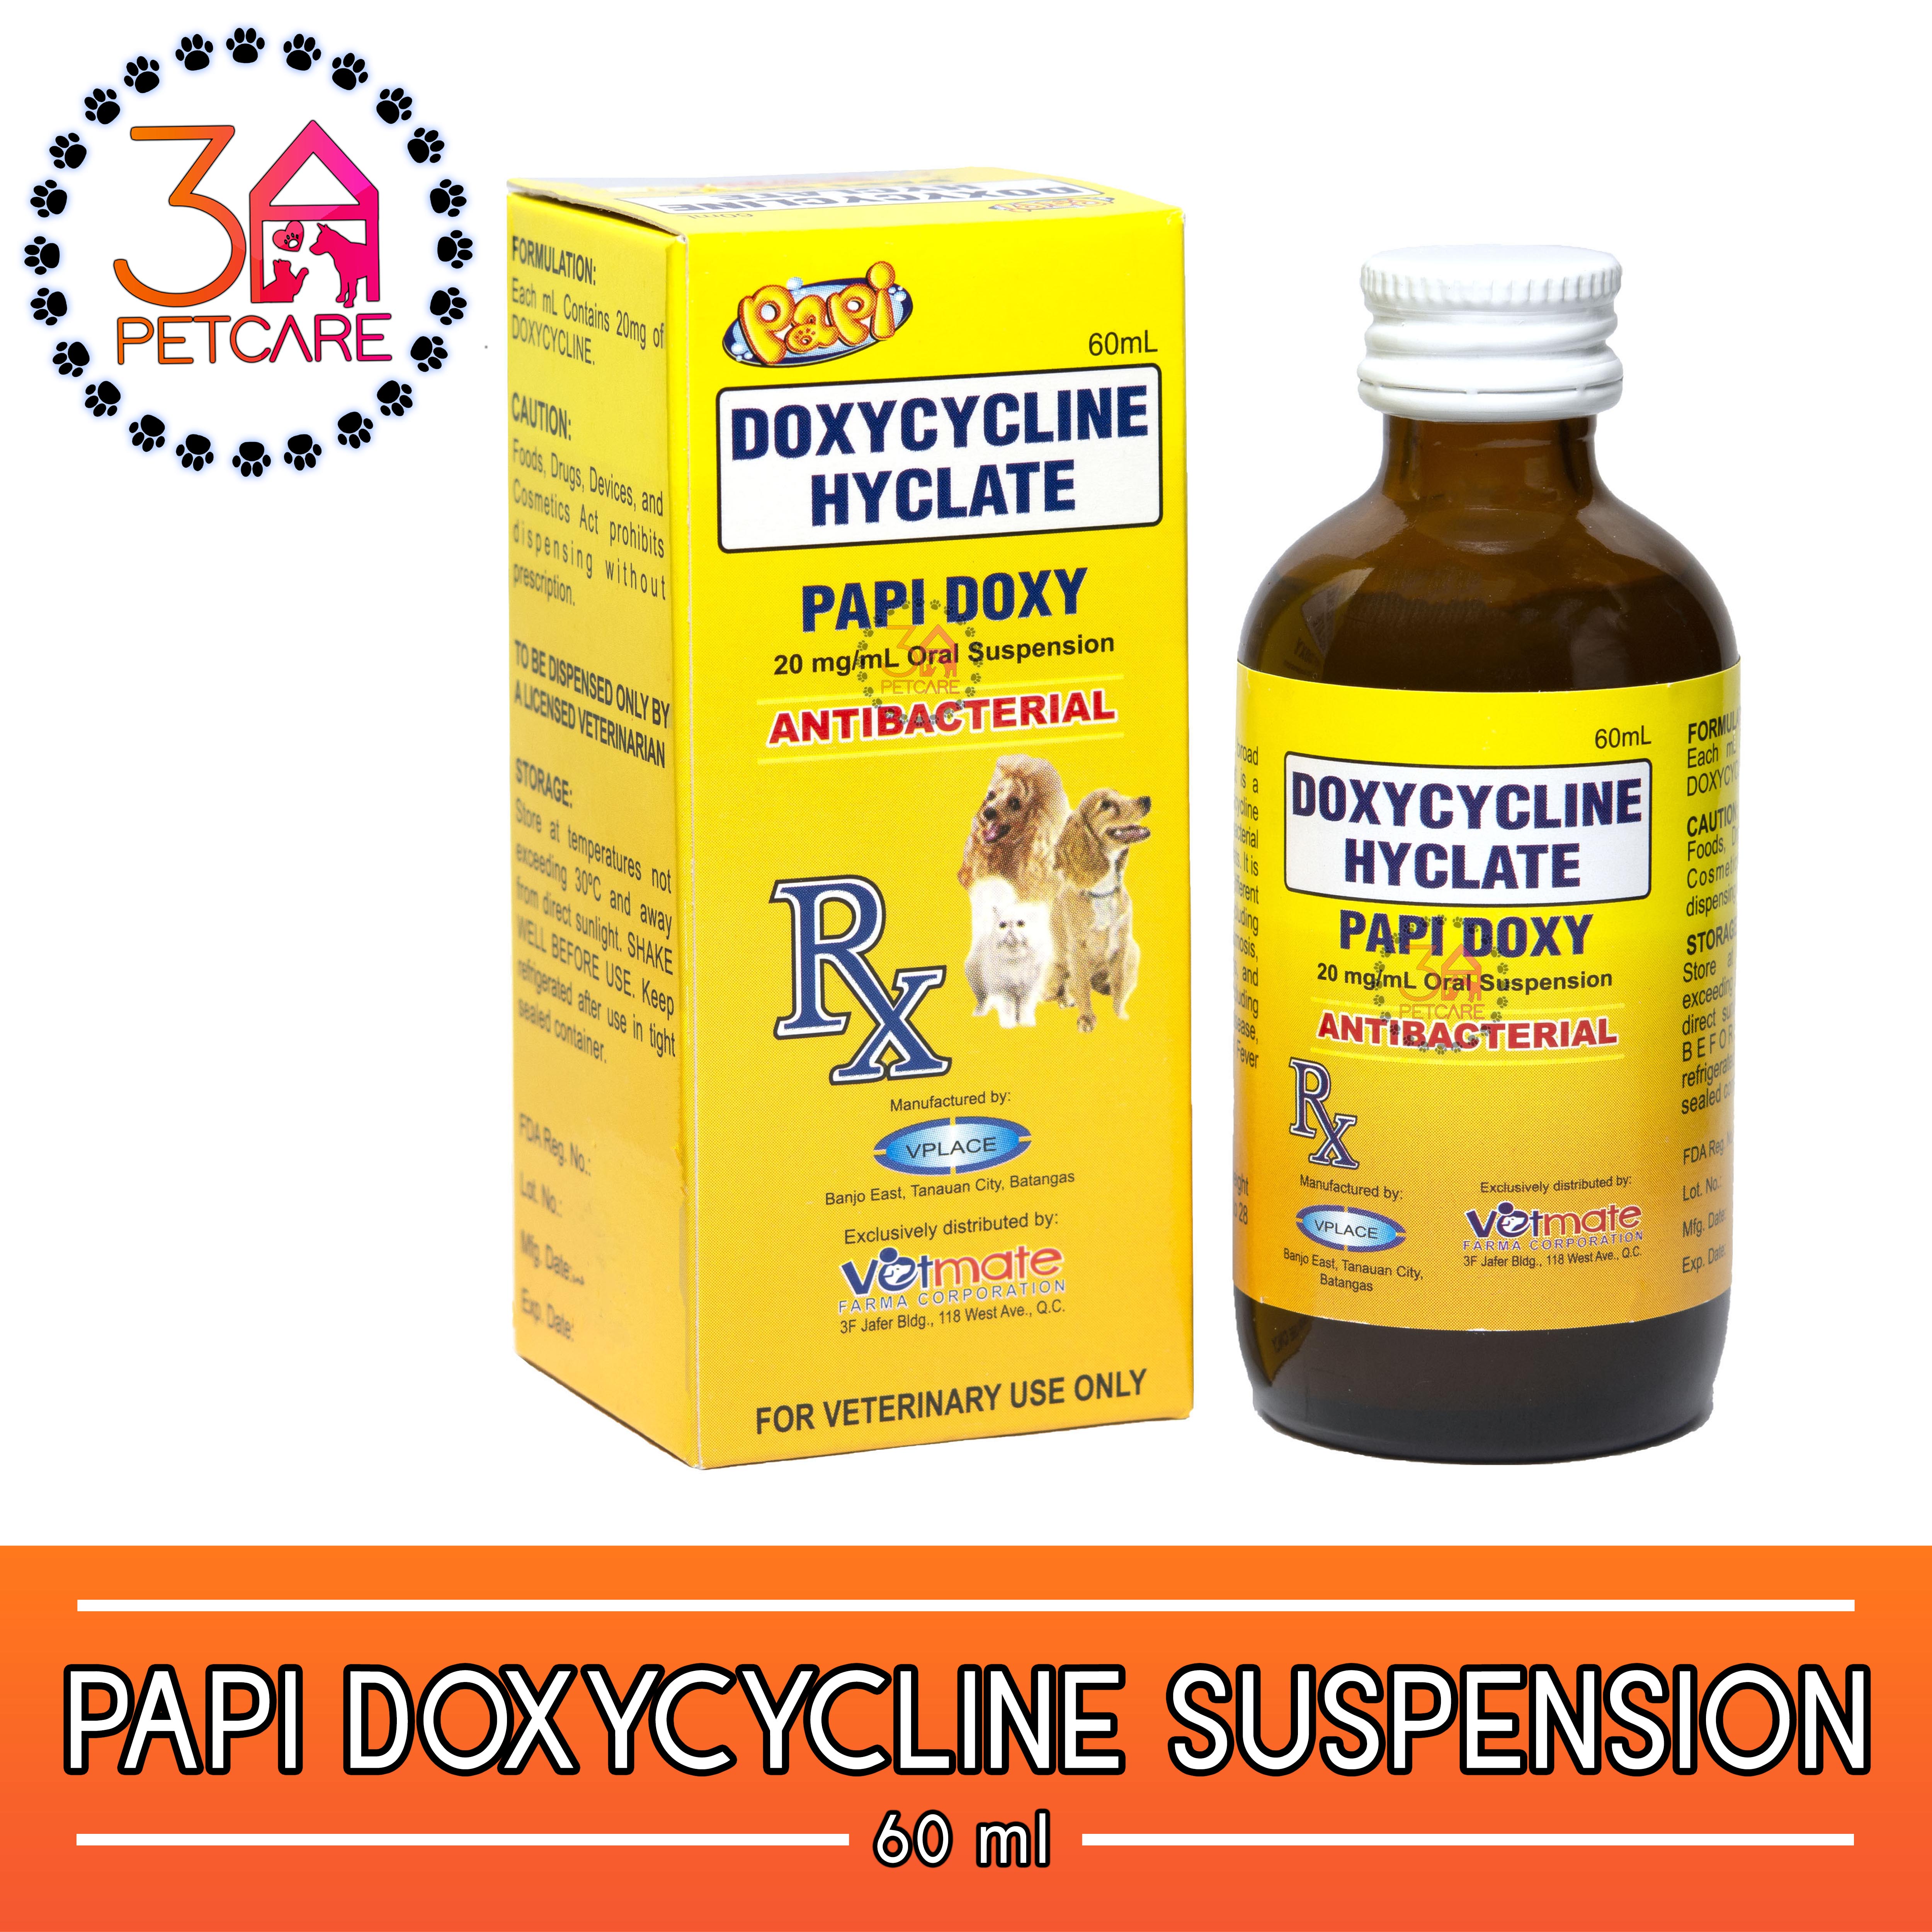 doxycycline uses for cats